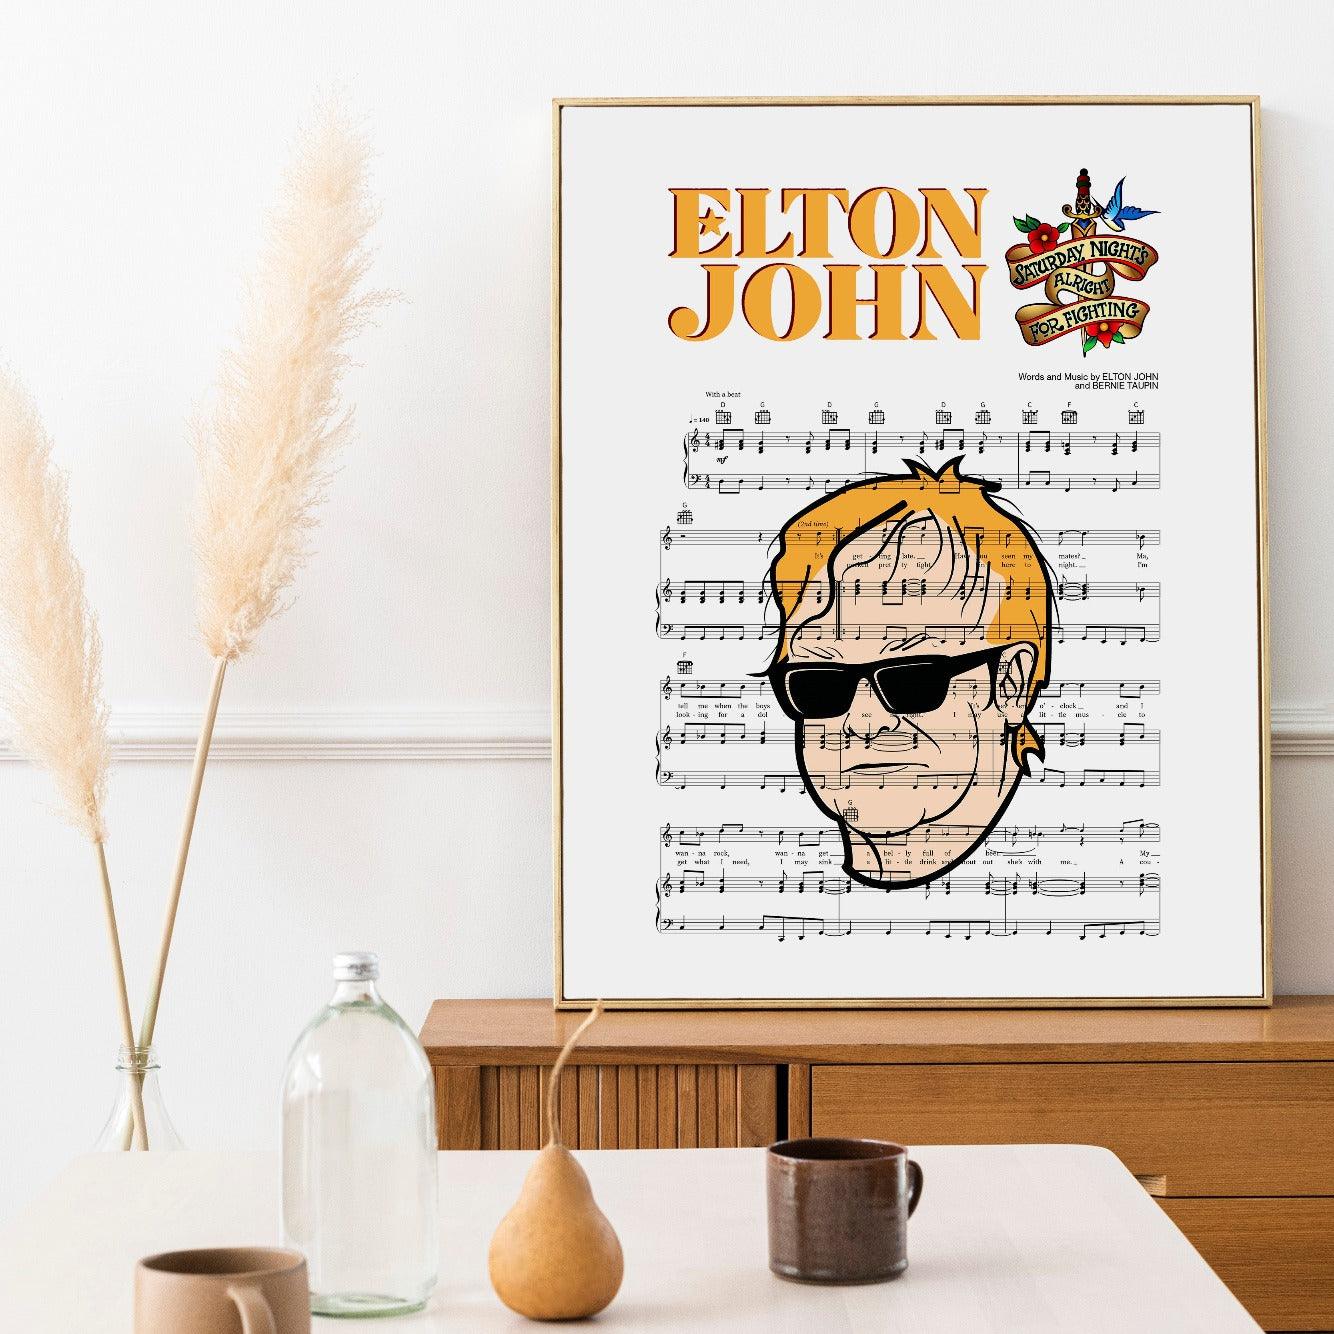 98Types Music brings you the very best in music prints. This iconic print by Elton John is a great addition to any music lover’s bedroom. The lyrics to his FIRST DANCE WEDDING SONG will look great on any wall. Add a touch of personality to your home decor with this unique and stylish print.